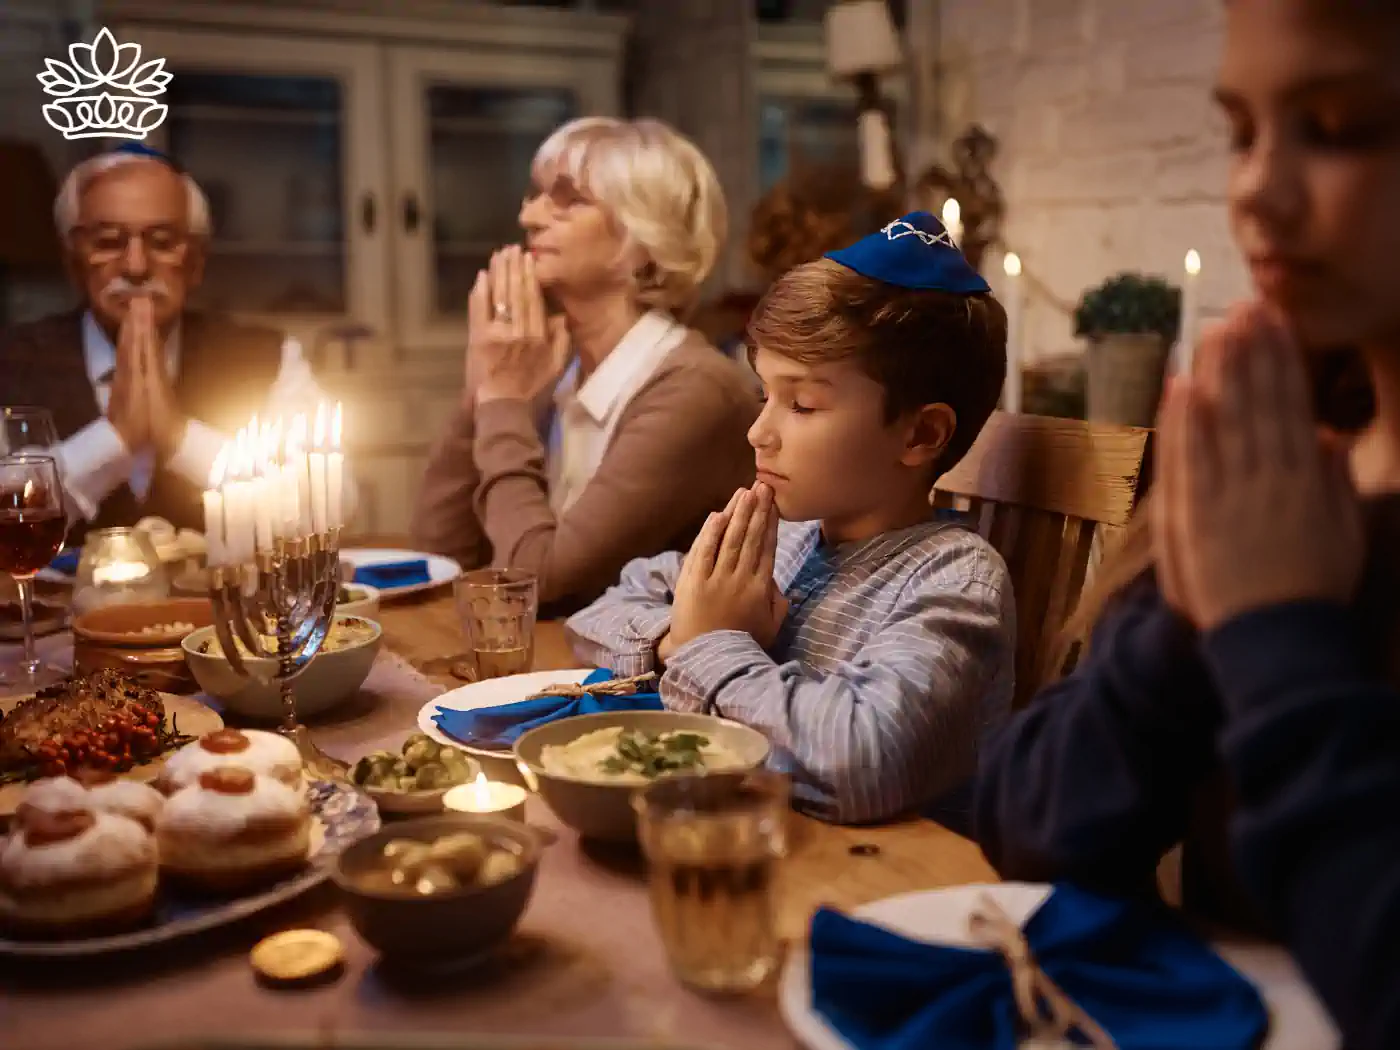 A family praying together at a Hanukkah dinner table, with a menorah and traditional dishes. Fabulous Flowers and Gifts - Hanukkah Collection.